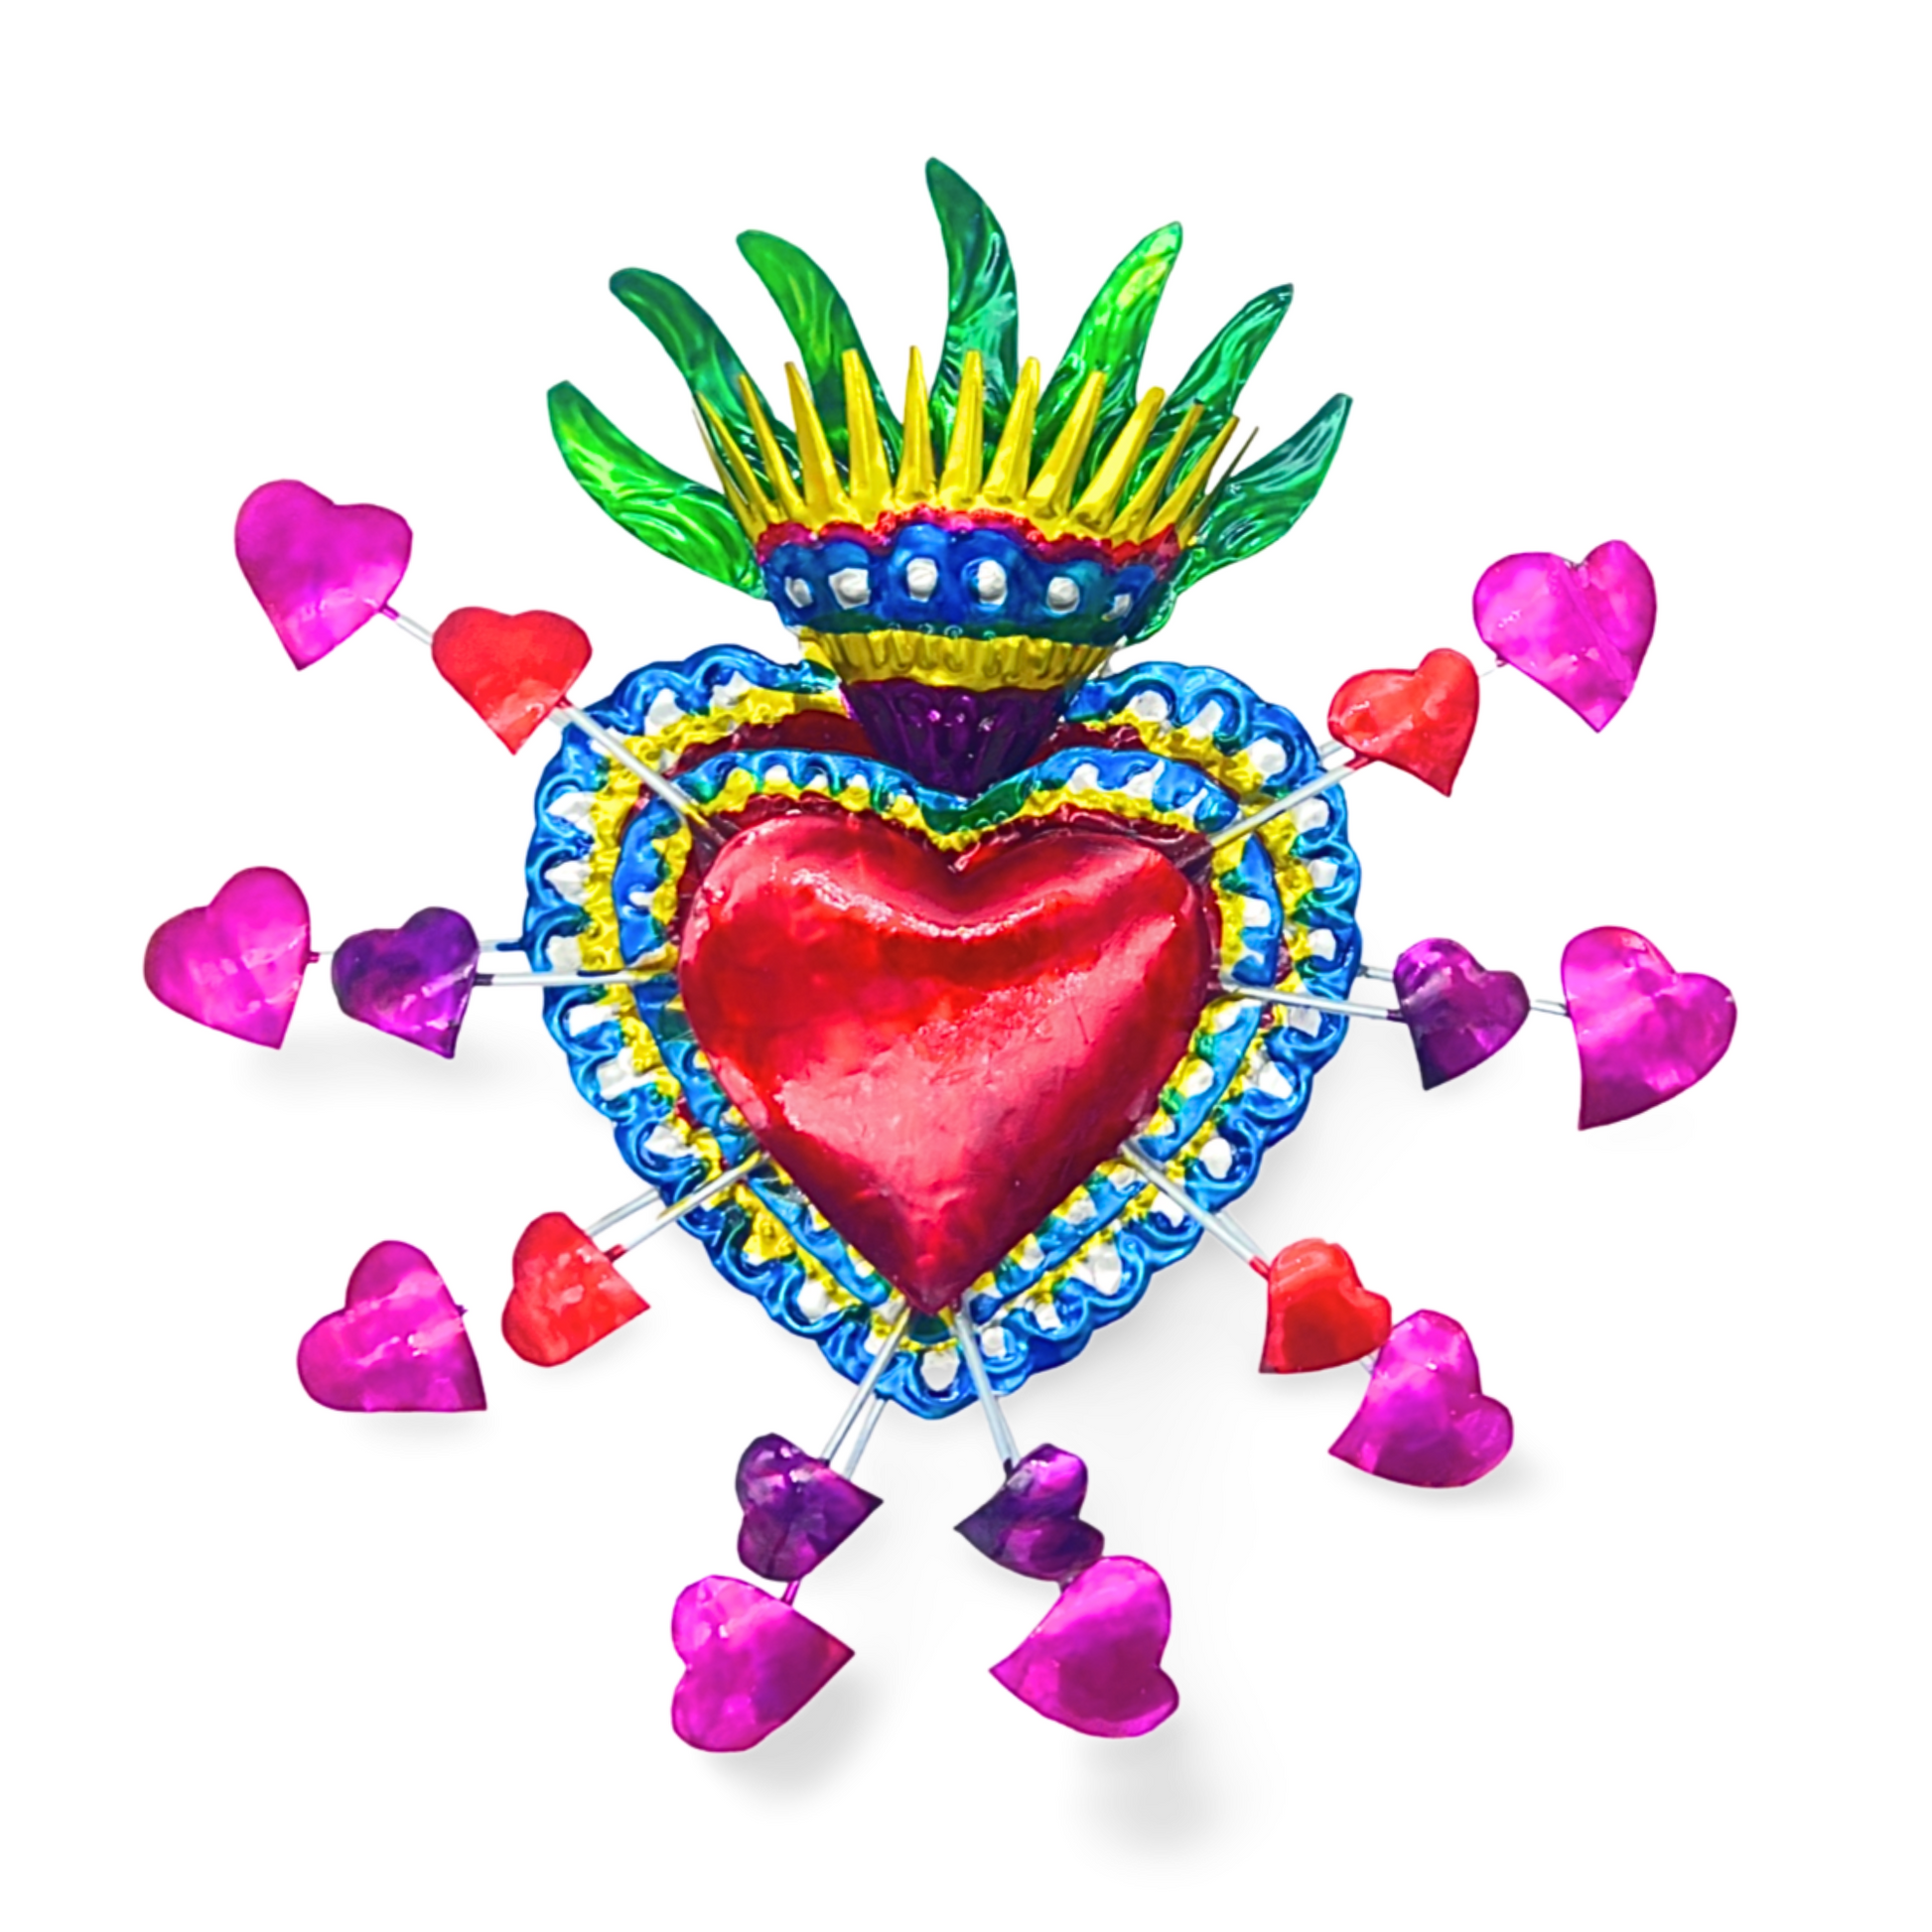 Handcrafted Embossed Tin Heart Milagro, vibrant Mexican Folk Art wall decor, supporting local Mexican artisans.